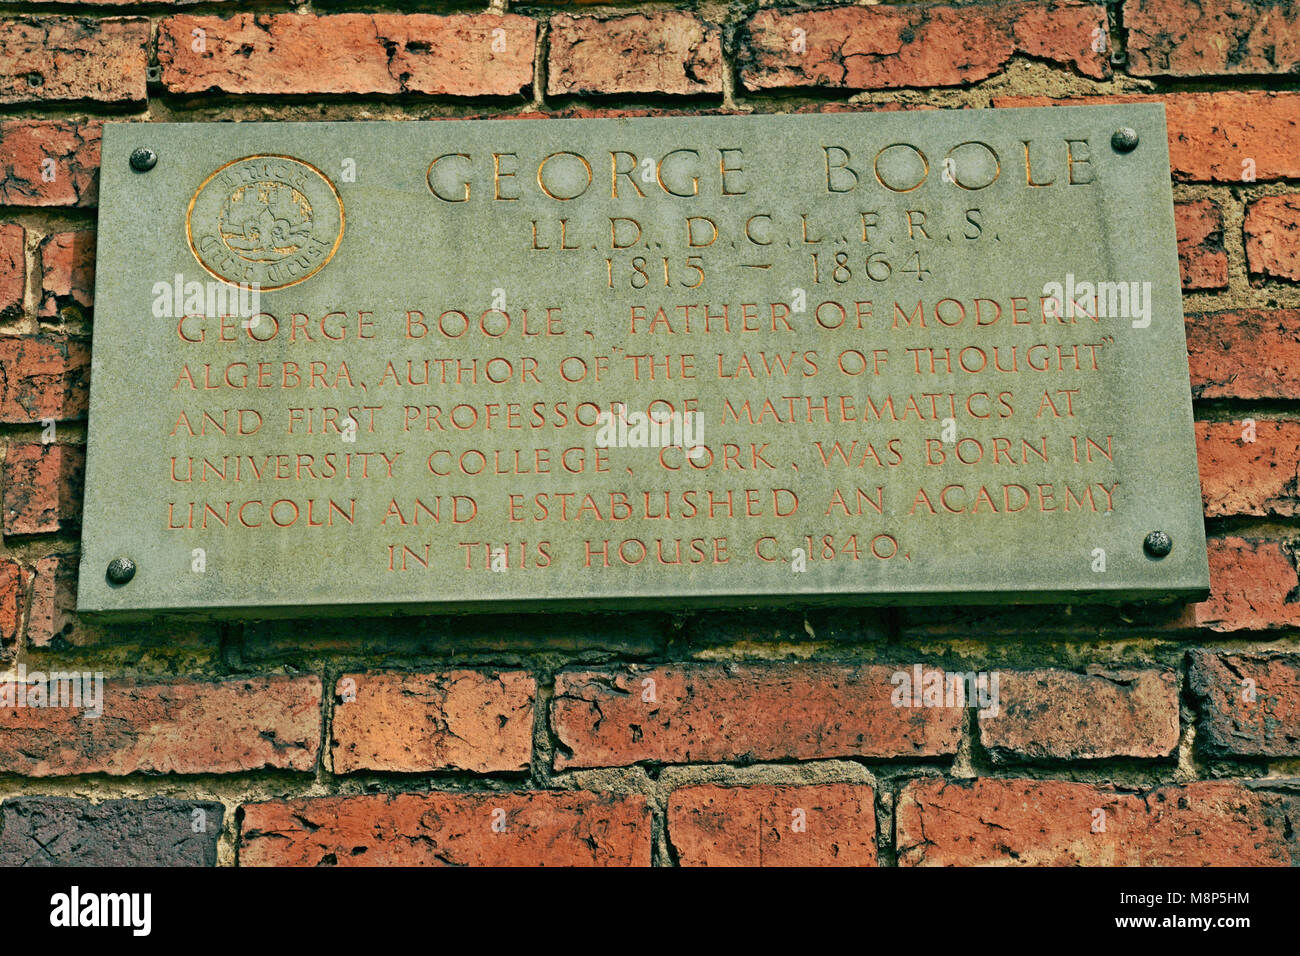 George Boole (Boolean Algebra, basis of computer logic circuits) memorial plaque in Lincoln, UK Stock Photo